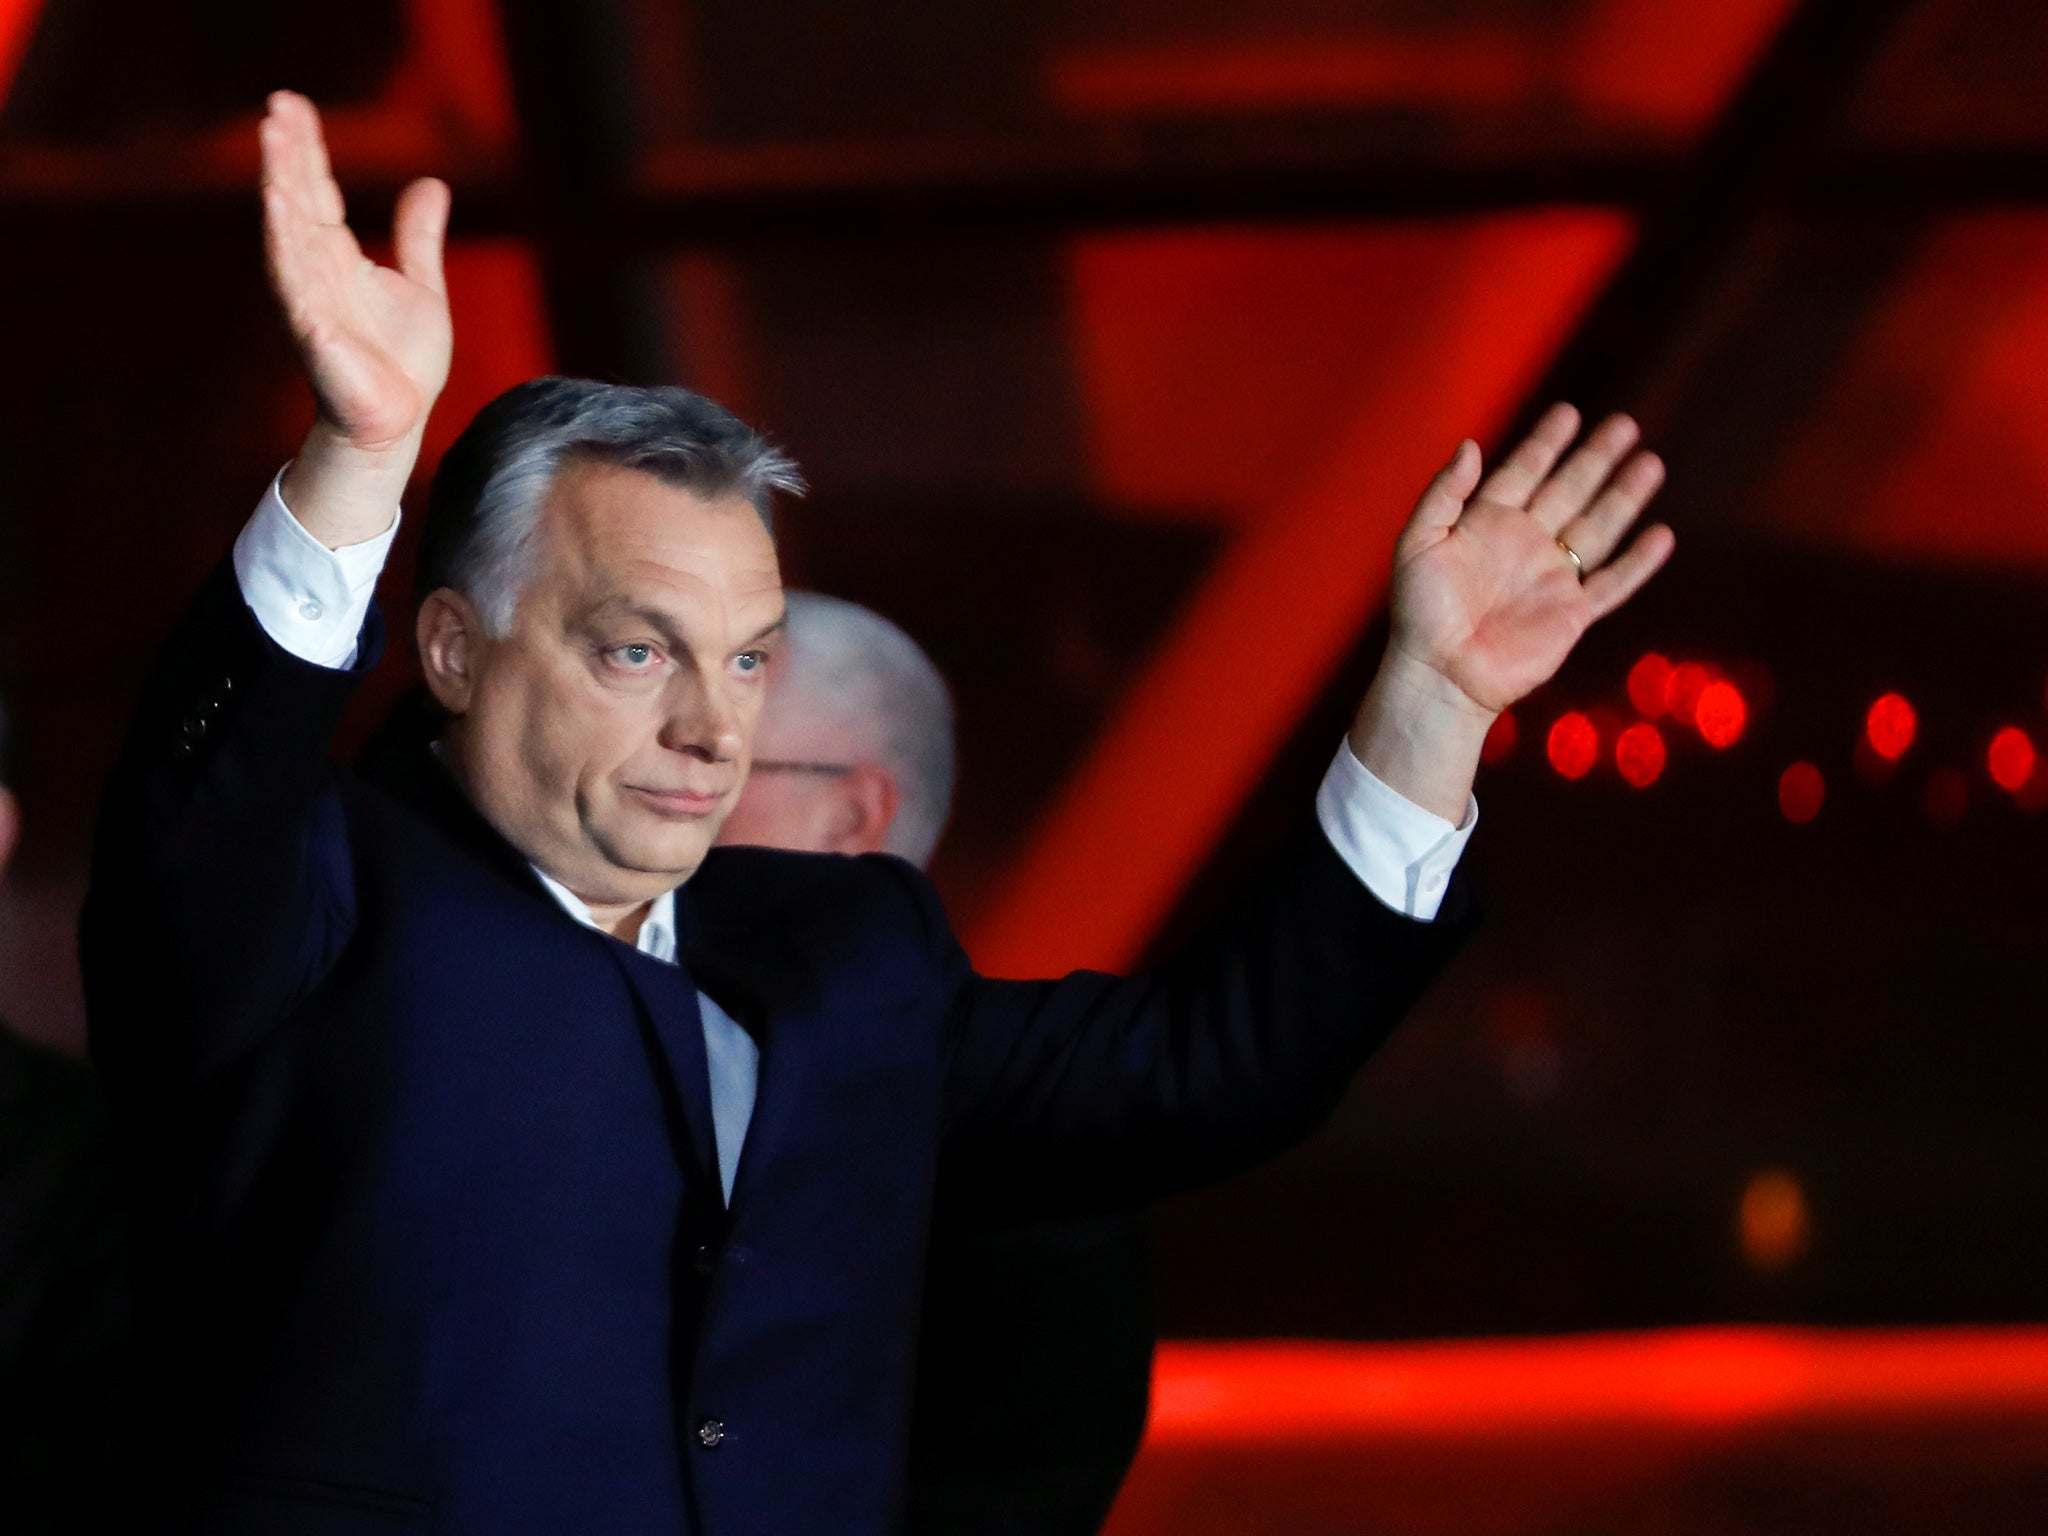 Western Europe needs to look beyond the example of Hungary's Viktor Orban and look to cooperate with countries in the east